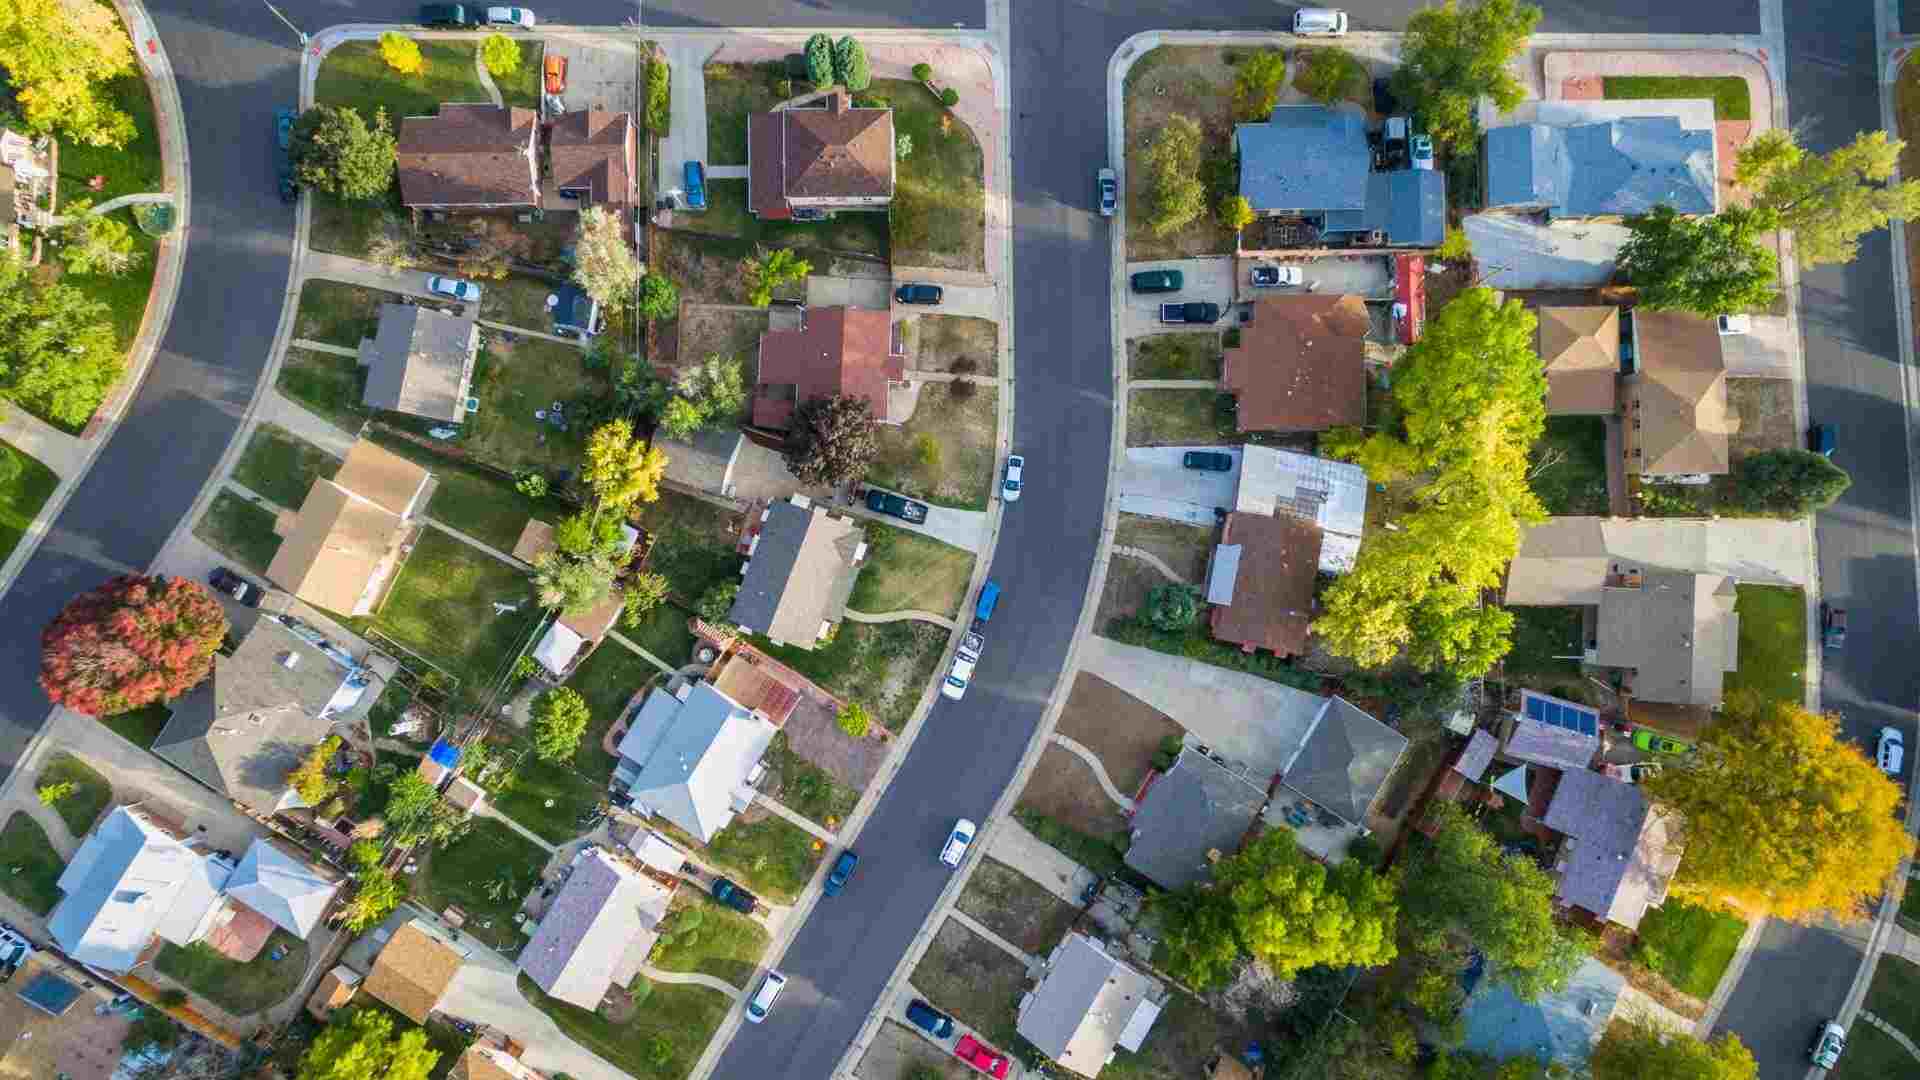 Bird’s eye view of a residential neighborhood with foliage, grass and cars parked around family-sized homes.